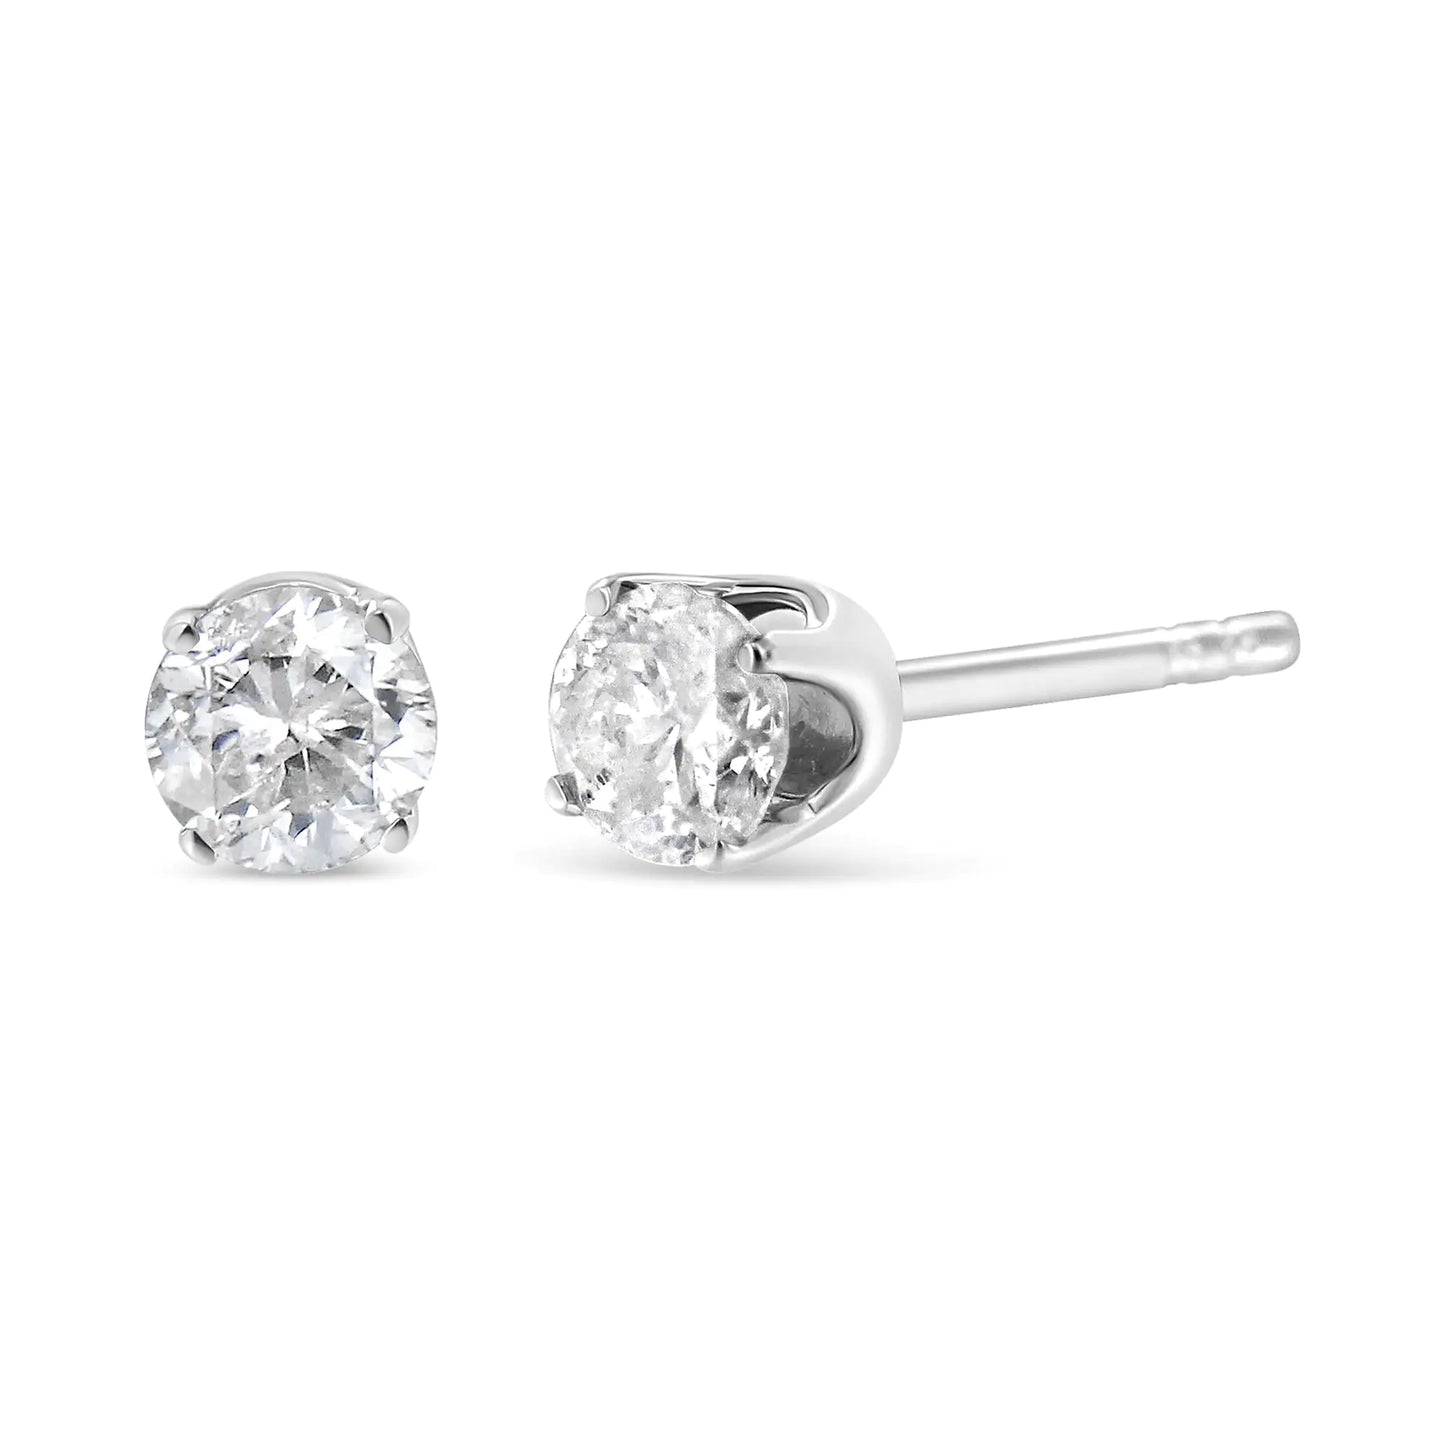 .925 Sterling Silver 3/8 Cttw Round Brilliant-Cut Diamond Classic 4-Prong Stud Earrings (I-J Color, I1-I2 Clarity)